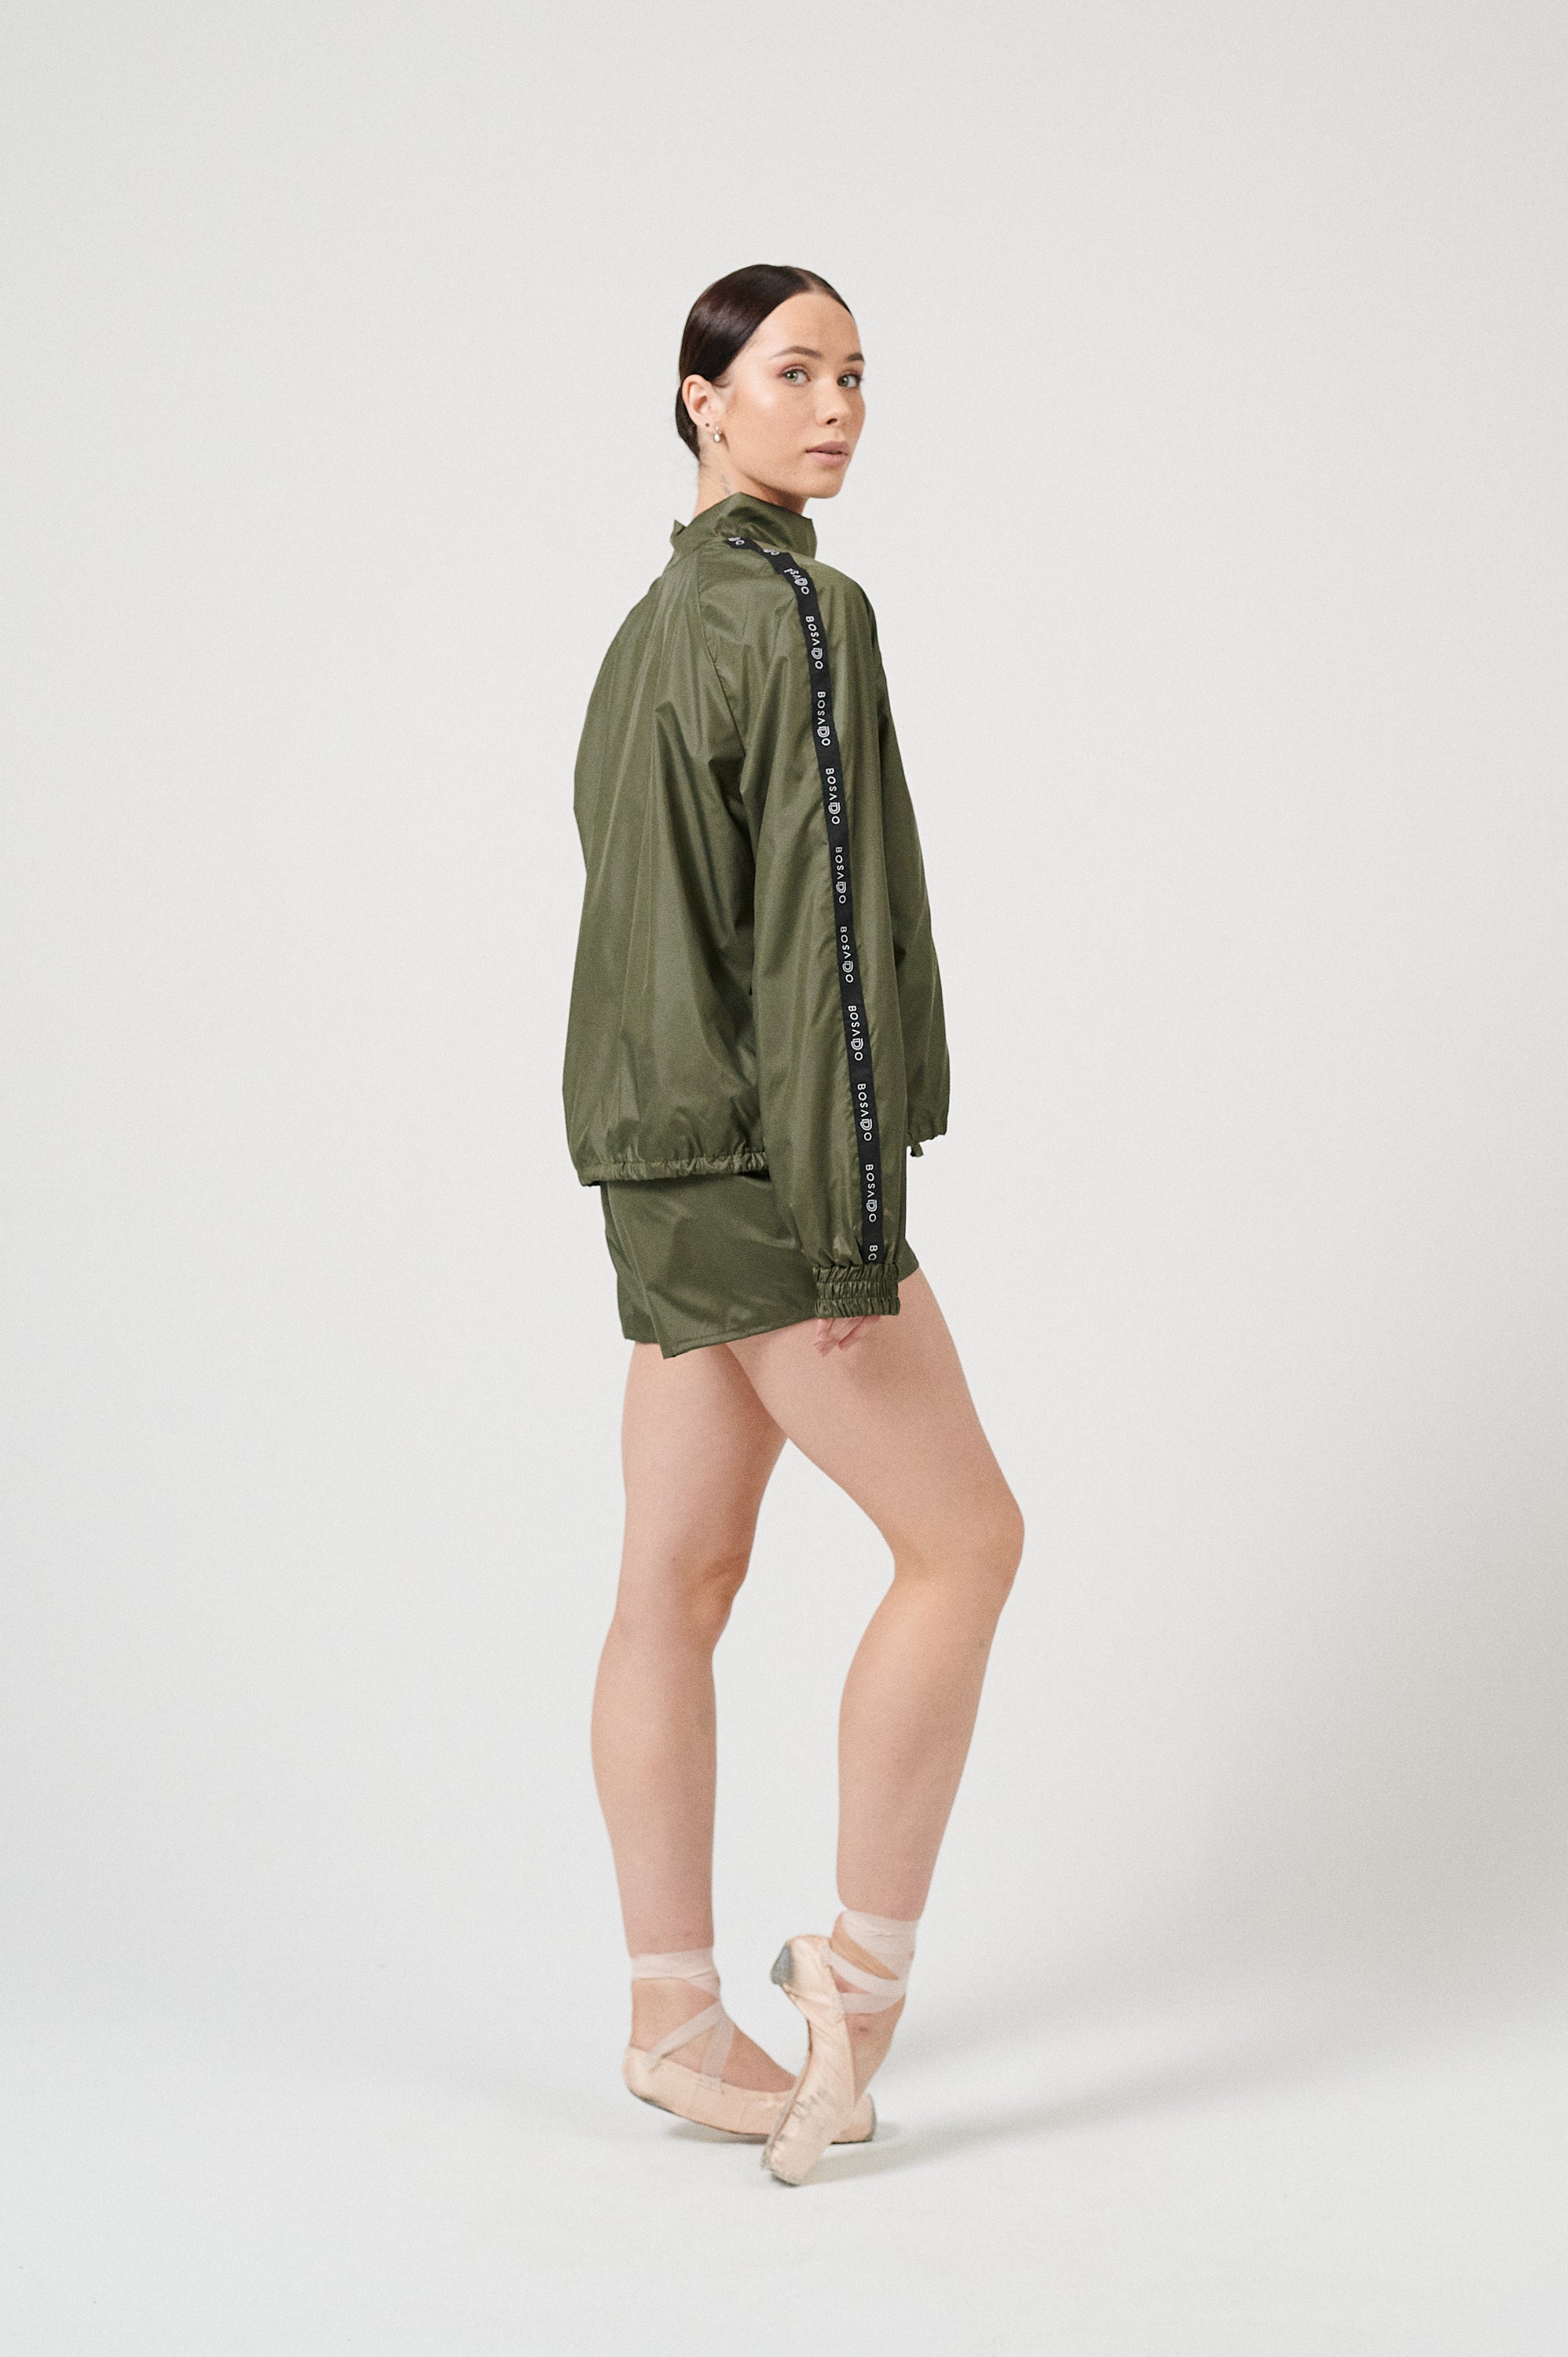 FUTURE GISELLE COLLECTION 24 | Utopian khaki sports suit with shorts